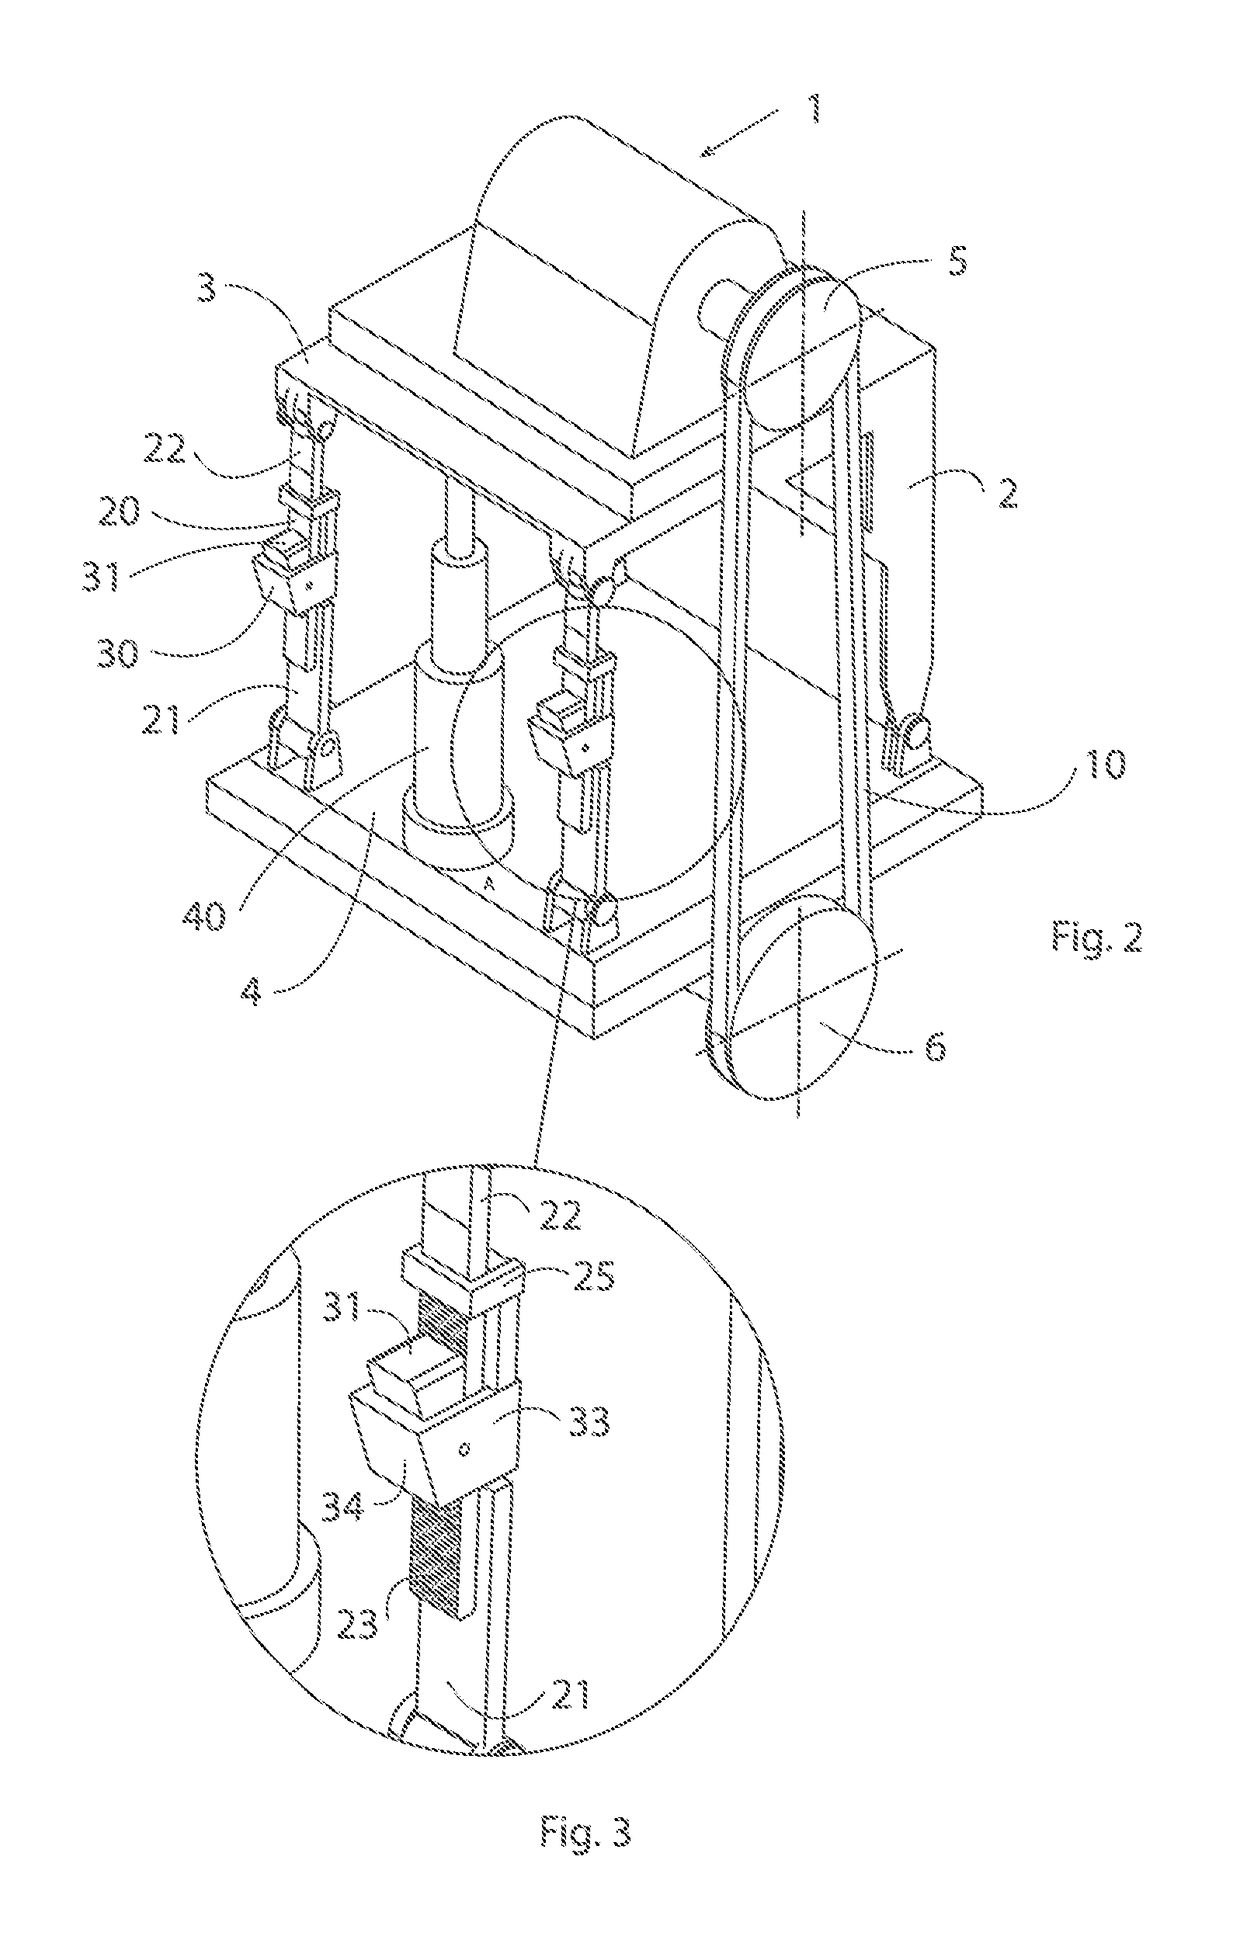 Device for locking a belt at predetermined belt tension